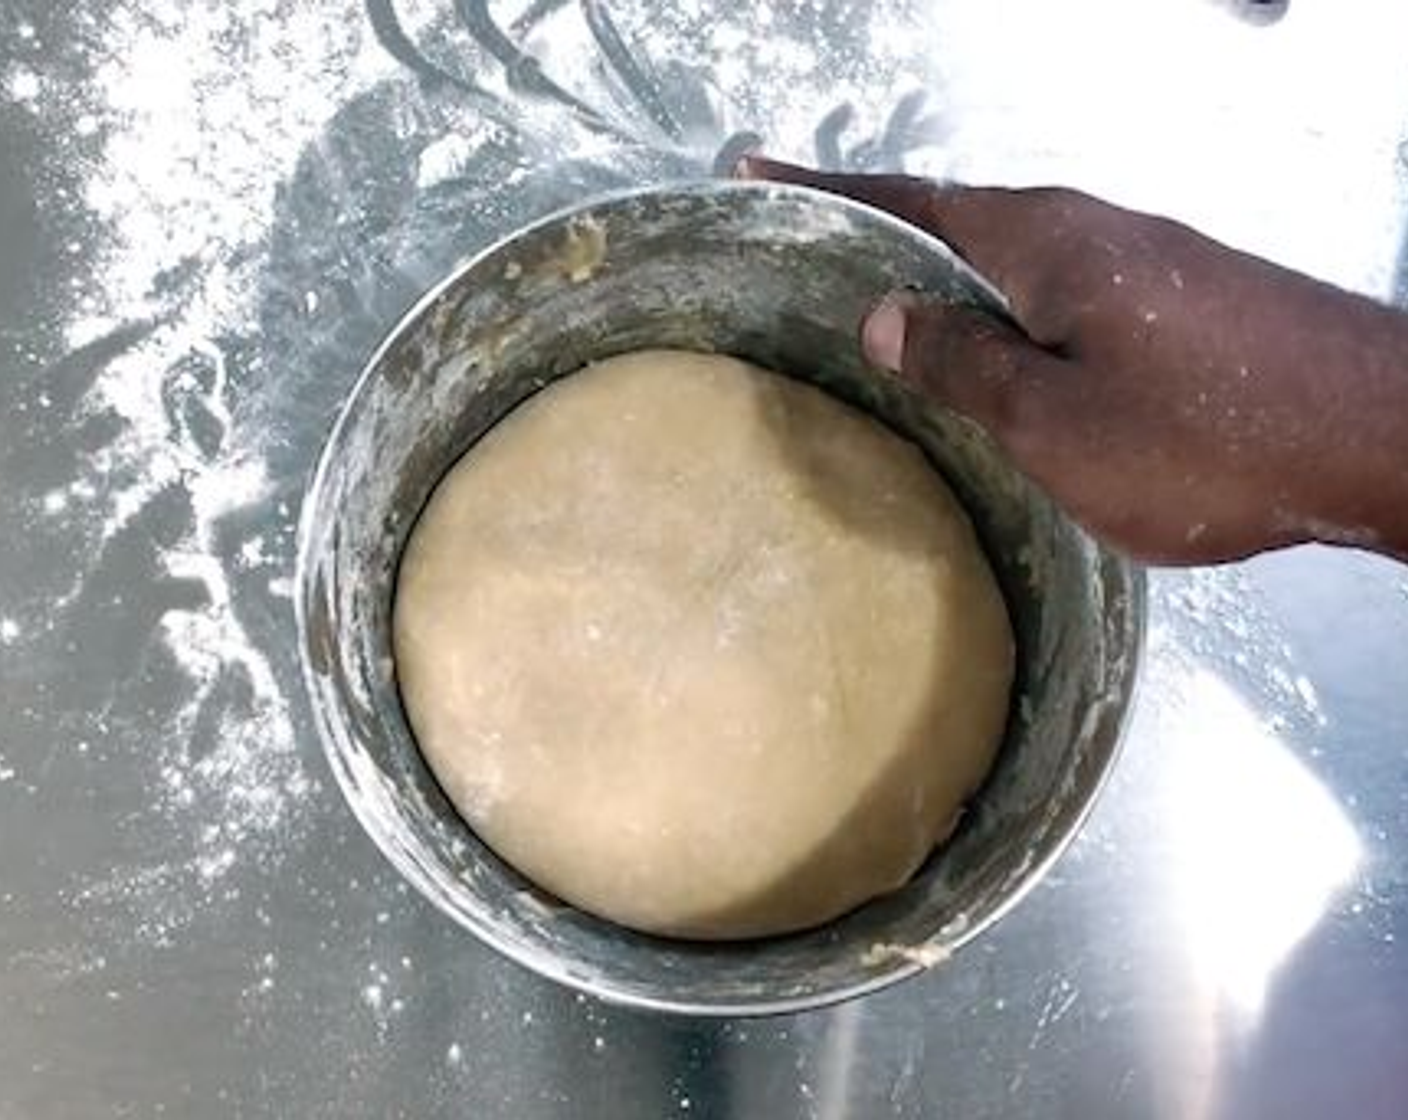 step 6 Remove the dough. It should be sticky but should not stick completely to your hand. Flour your surface and knead the dough a few times. You should be to press on the dough and have it spring back. Place the dough in a bowl, cover, and let it rise for about 1 1/2 hours.